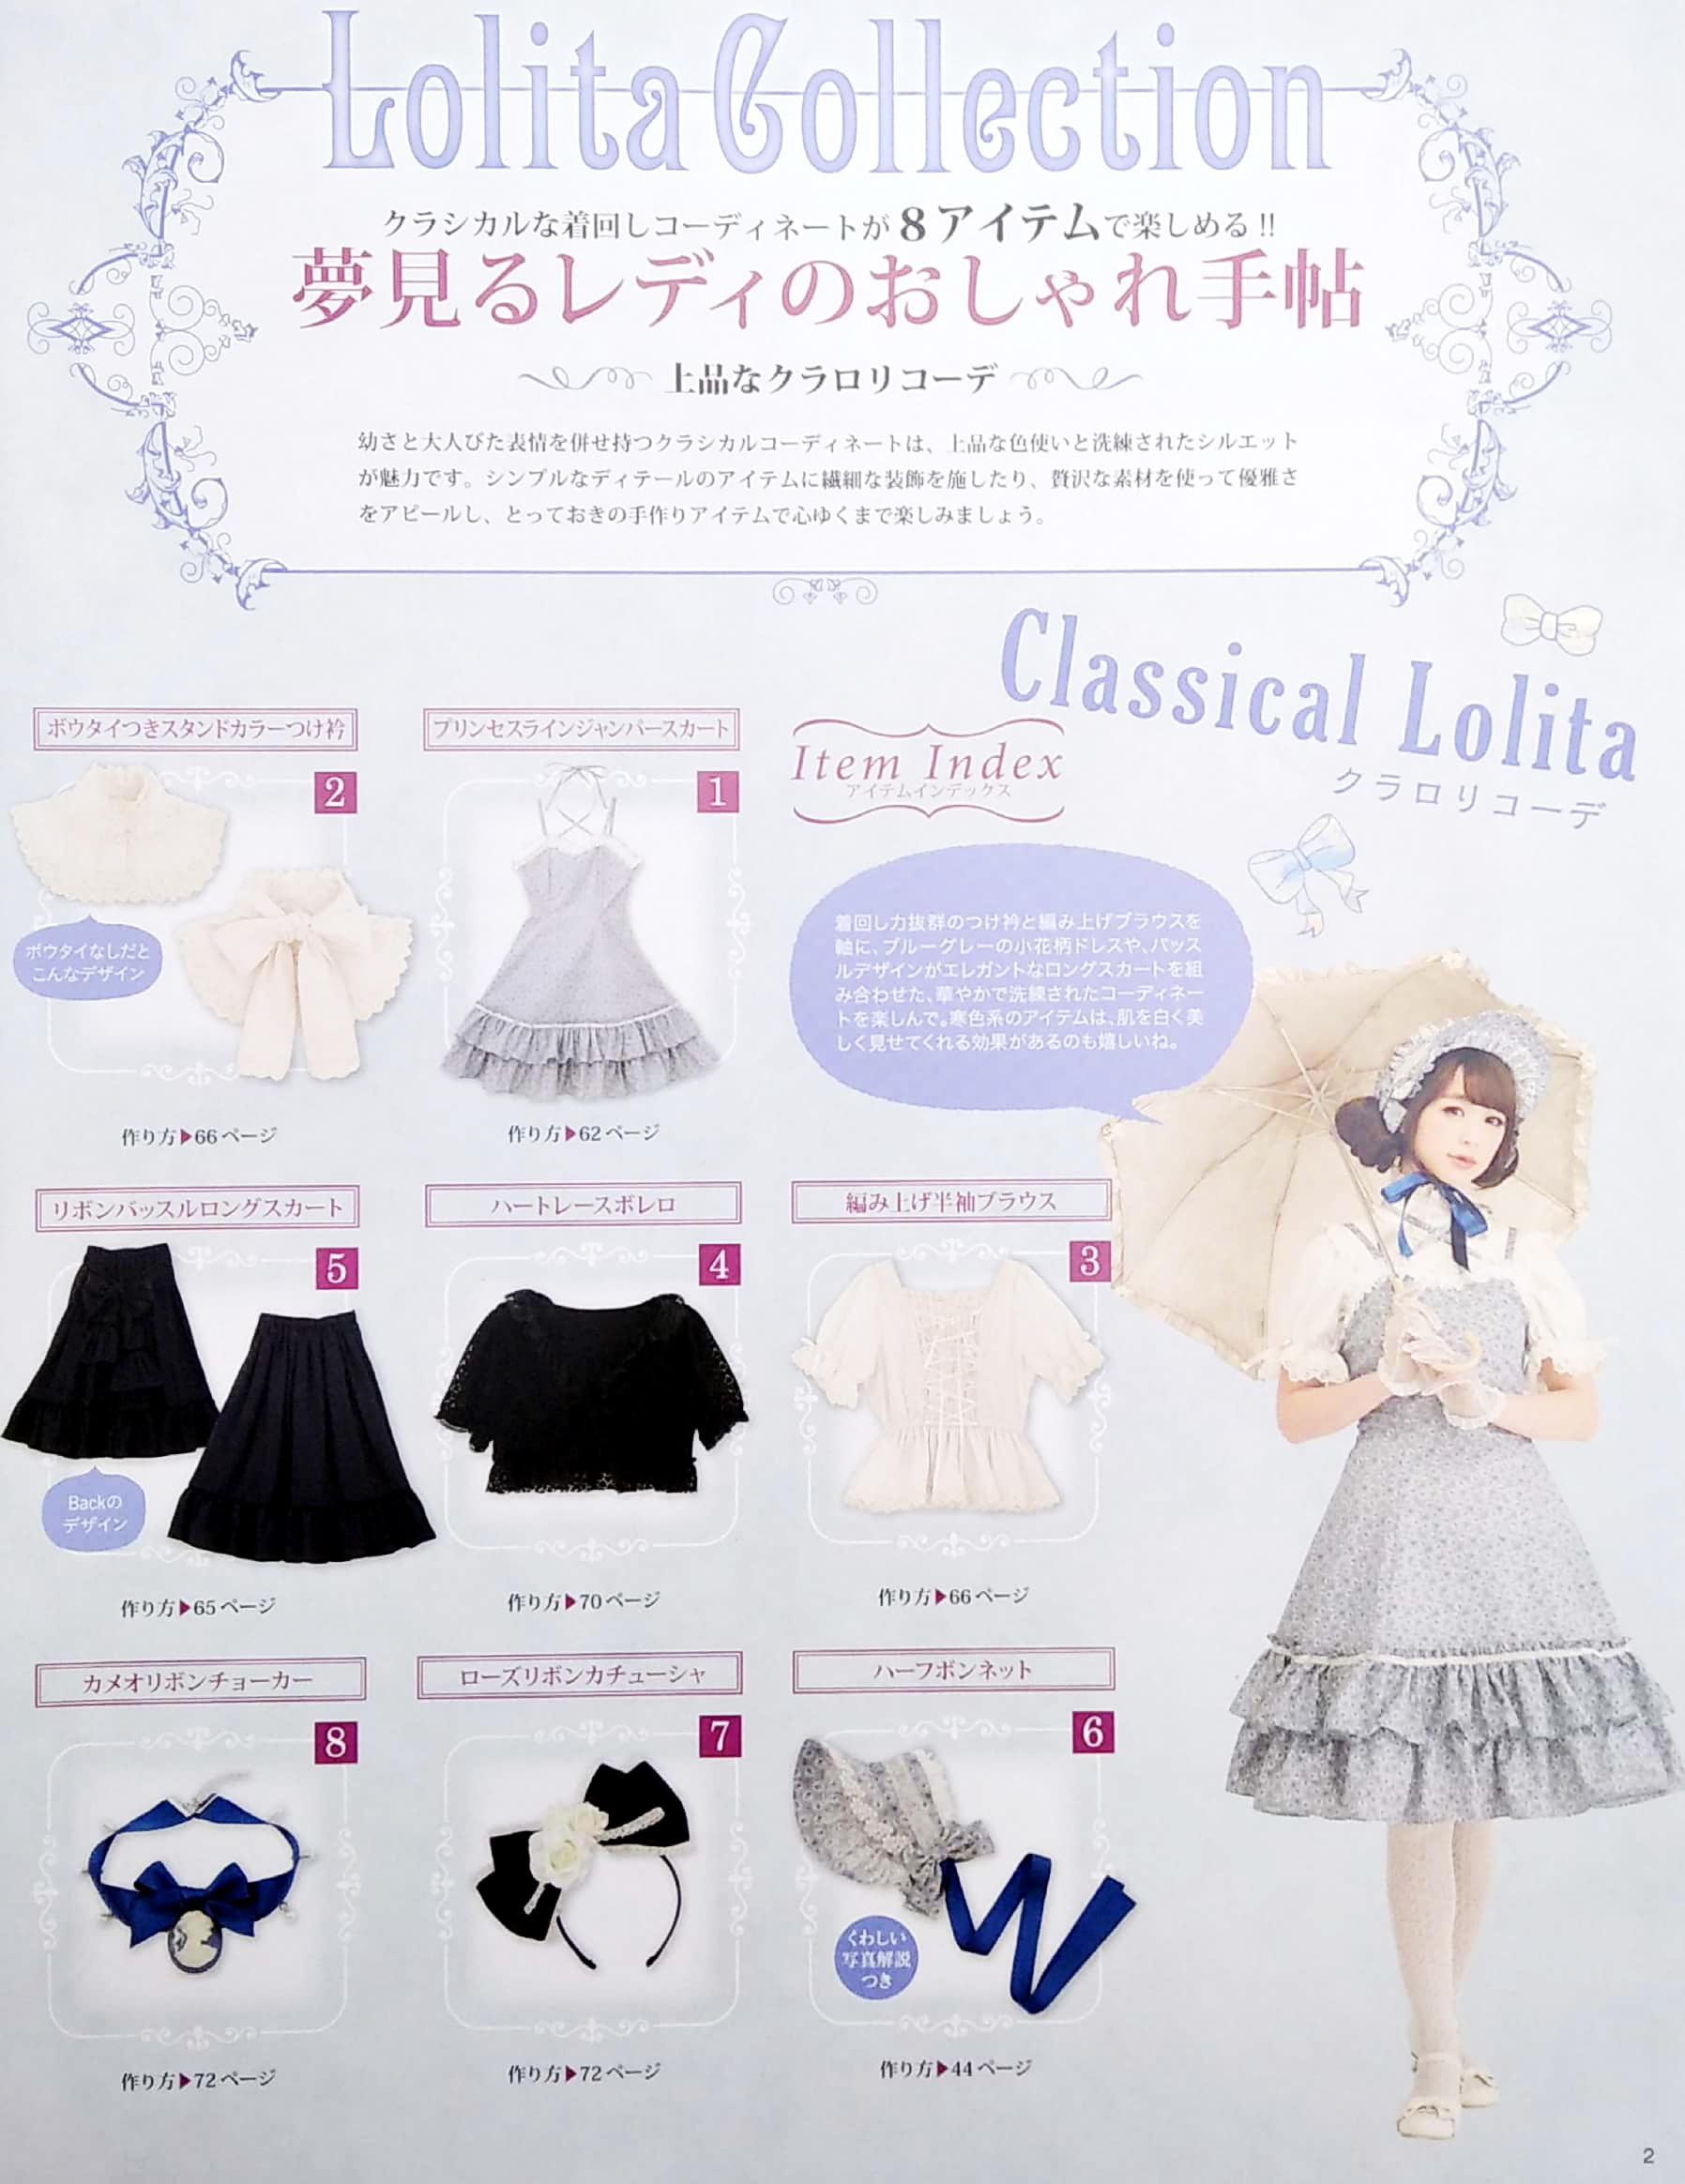 Book Of Girls Otome no Sewing Best Collection ~ Handmade Gothic Lolita Fashion (Japanese Edition)